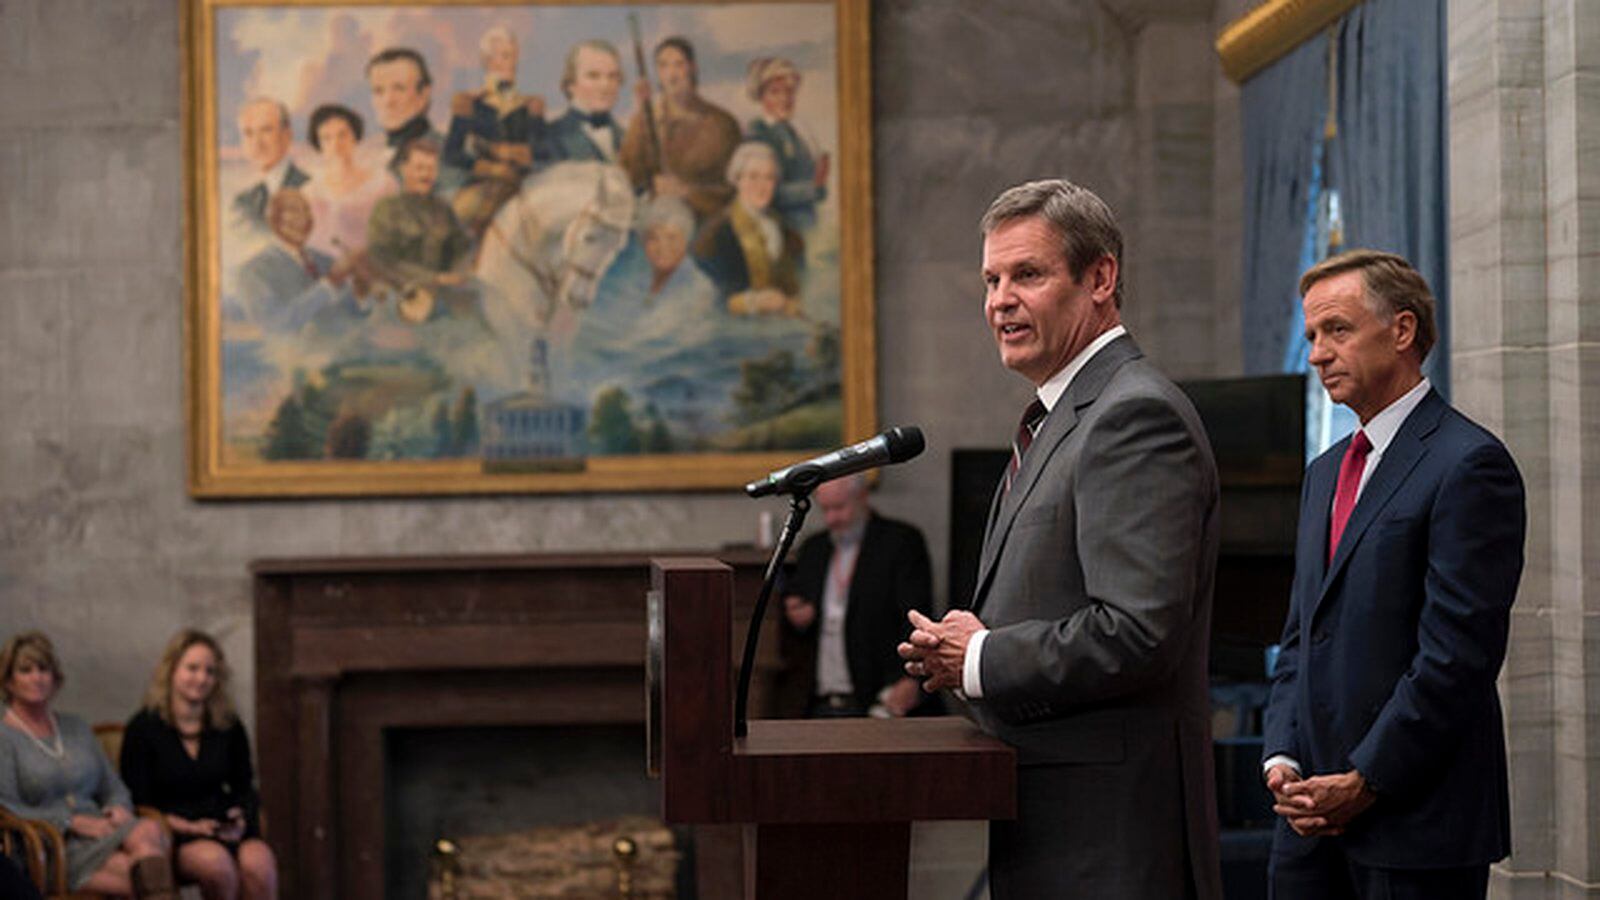 As outgoing Gov. Bill Haslam looks on, Gov.-elect Bill Lee speaks at the state Capitol the day after being elected the 50th governor of Tennessee.